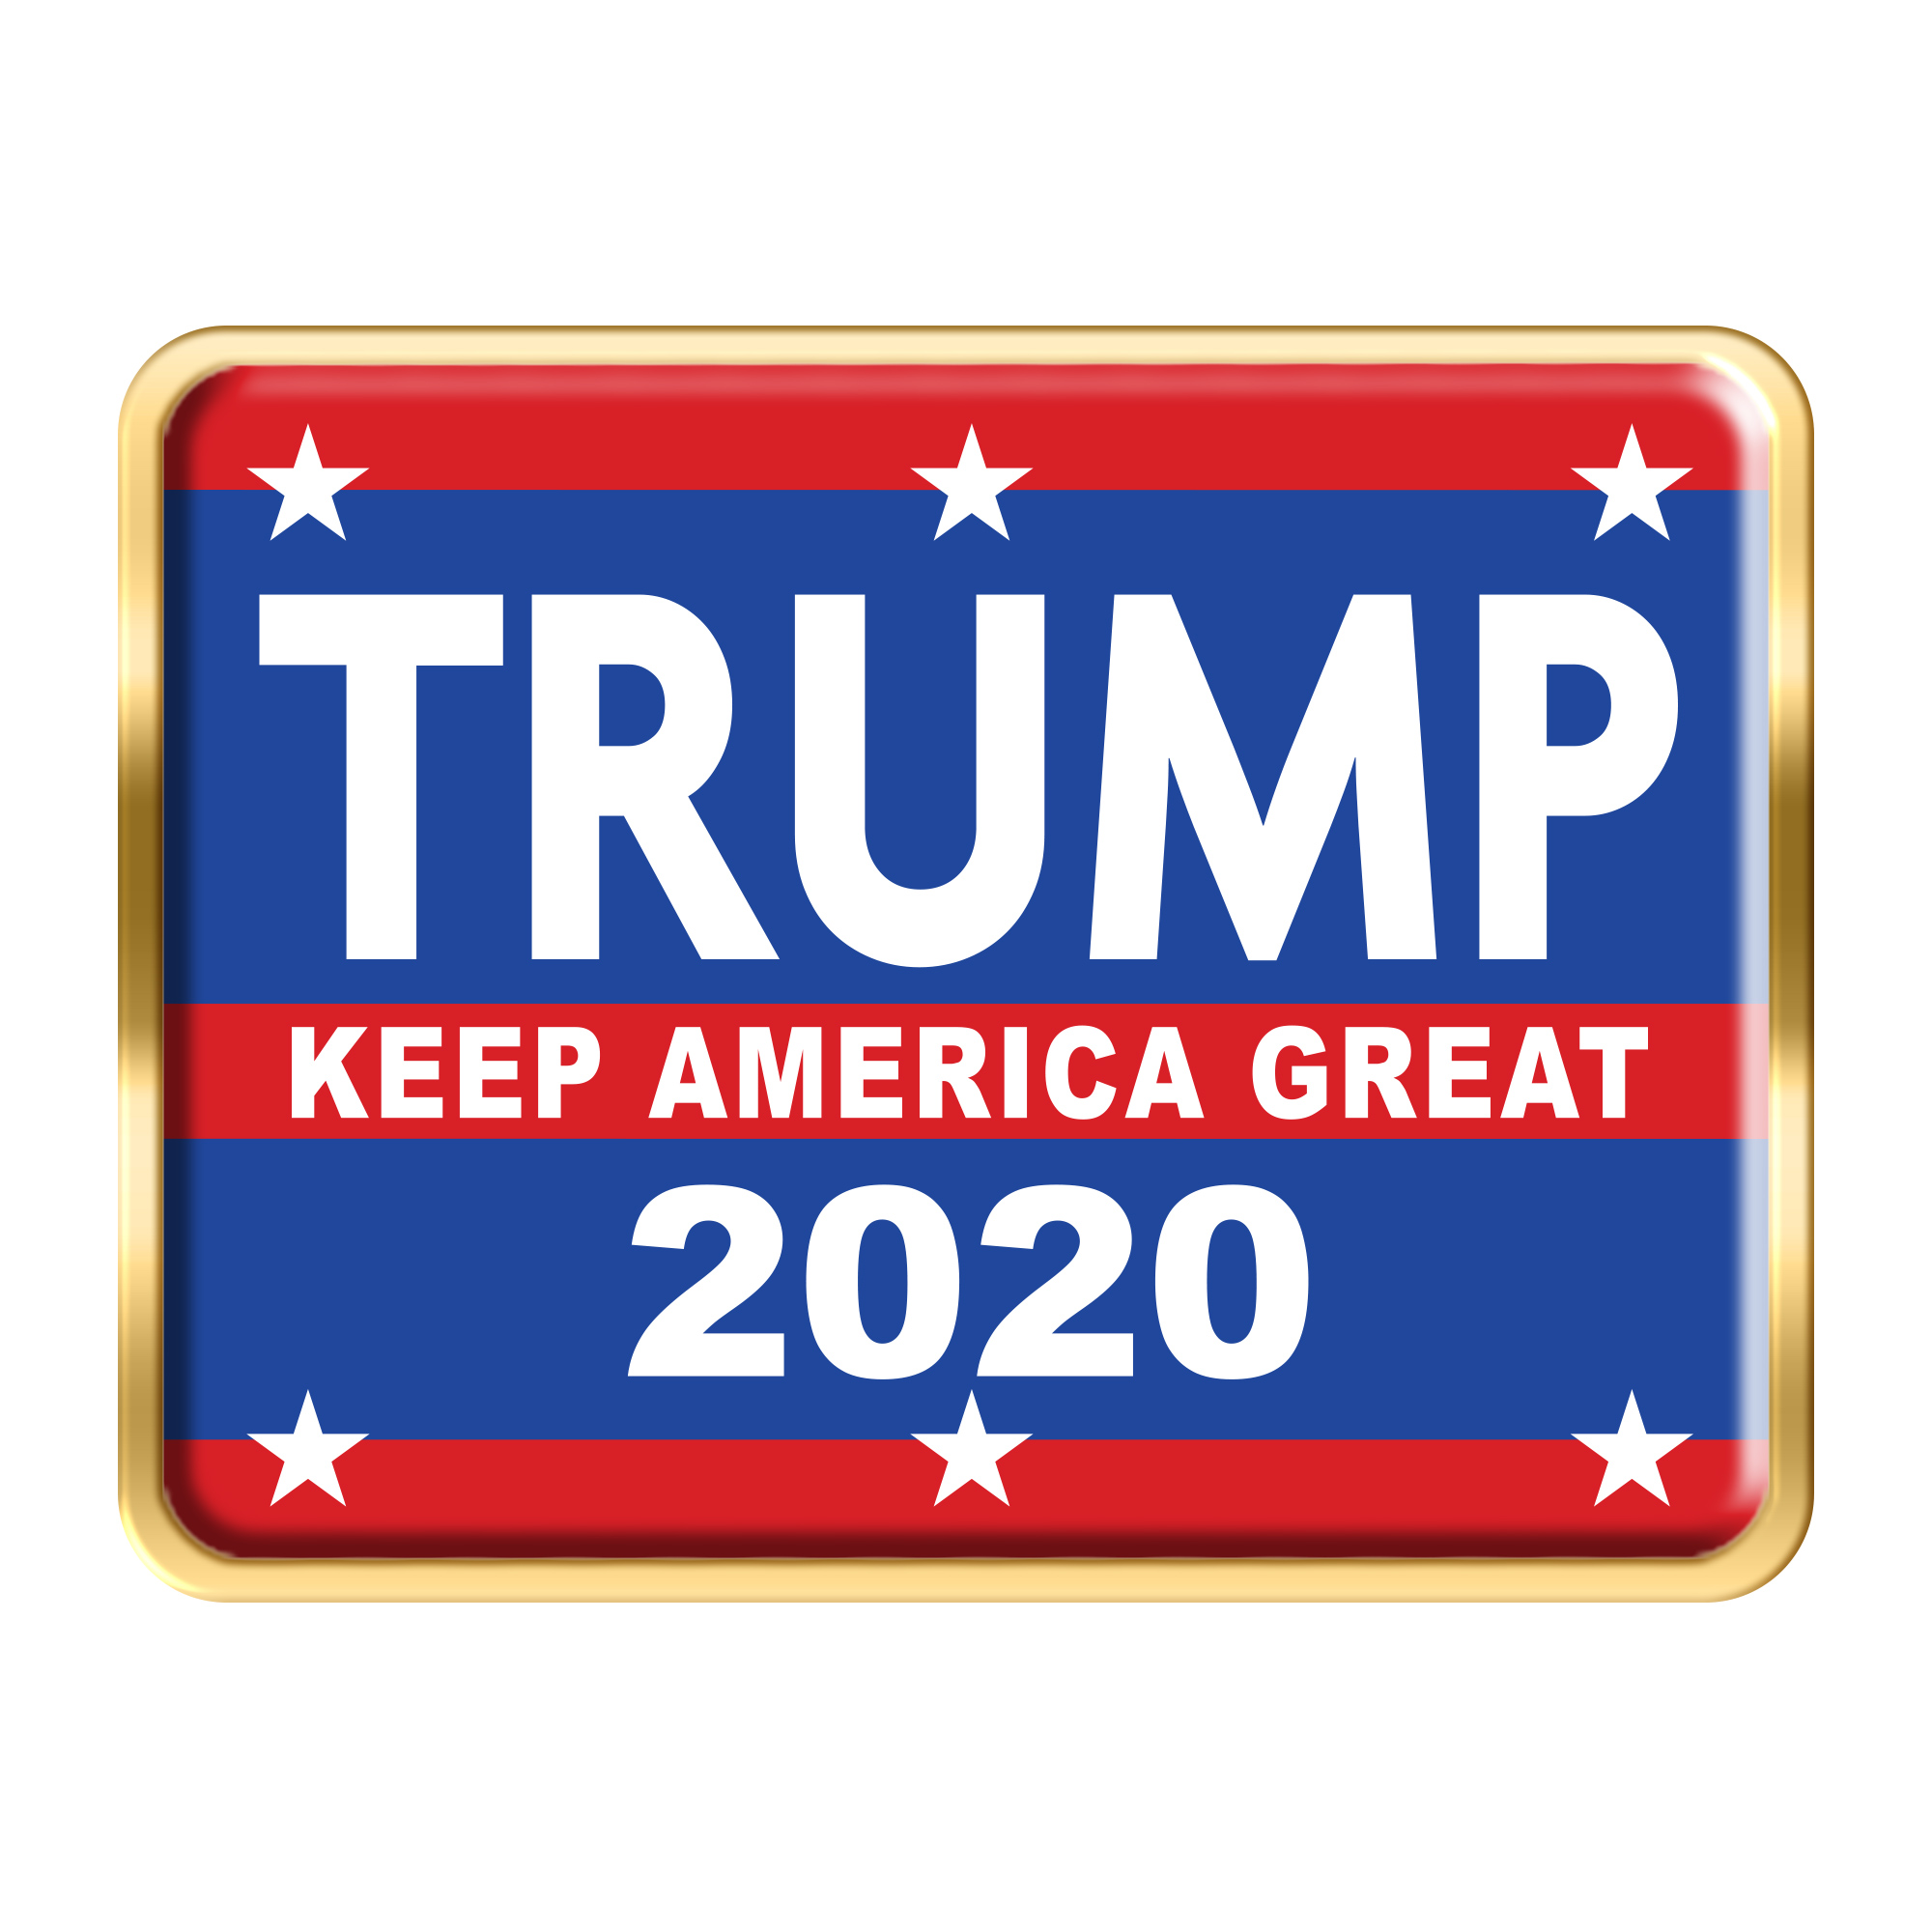 Trump Keep America Great Rounded Corner Rectangle Pin - 1.25 x 1 inch